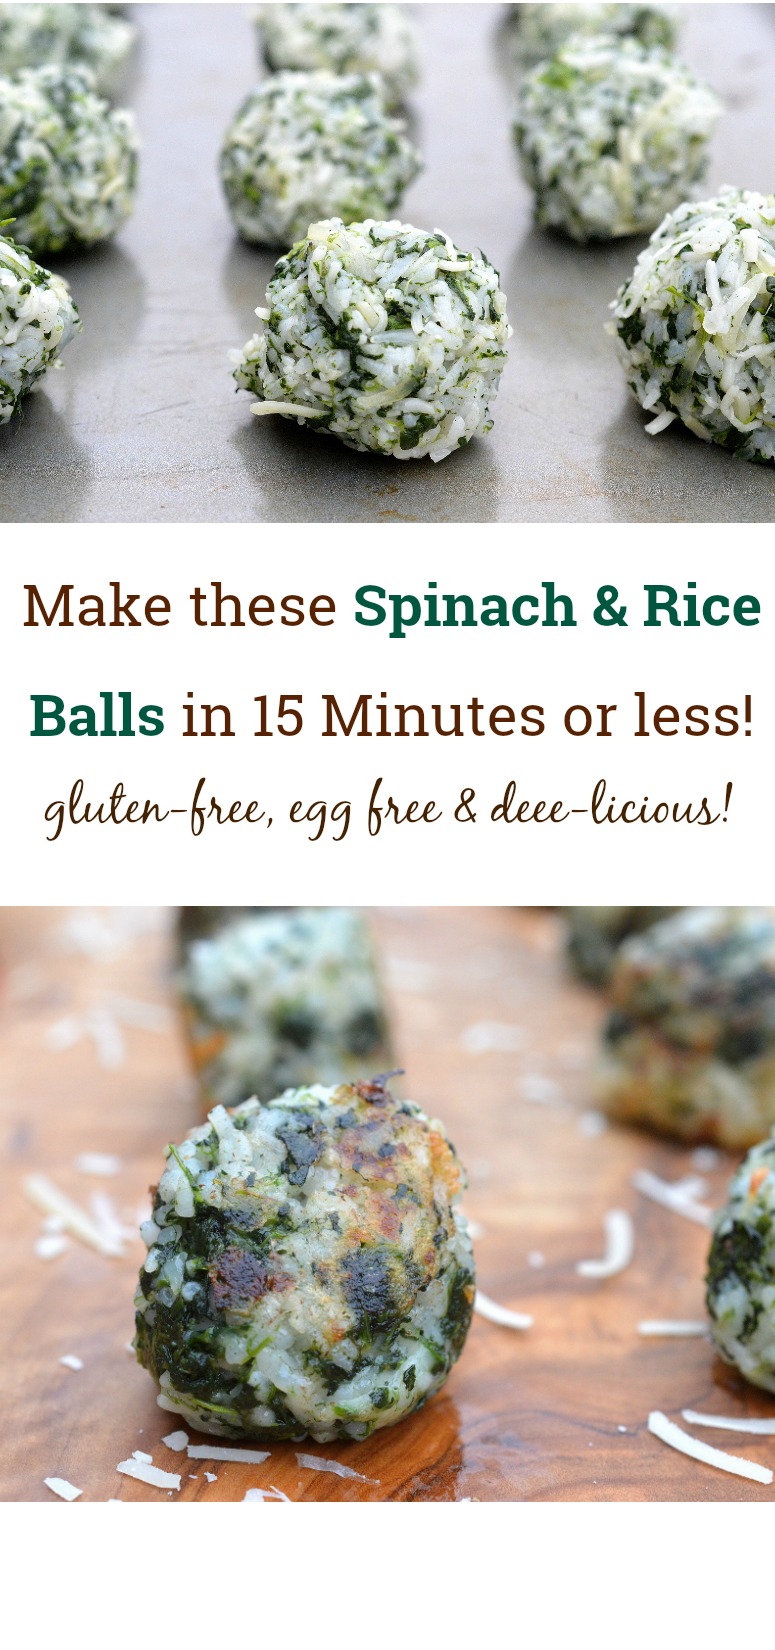 Spinach & Rice Balls, a delicious alternative to the traditional!Gluten free, egg free & delicious!